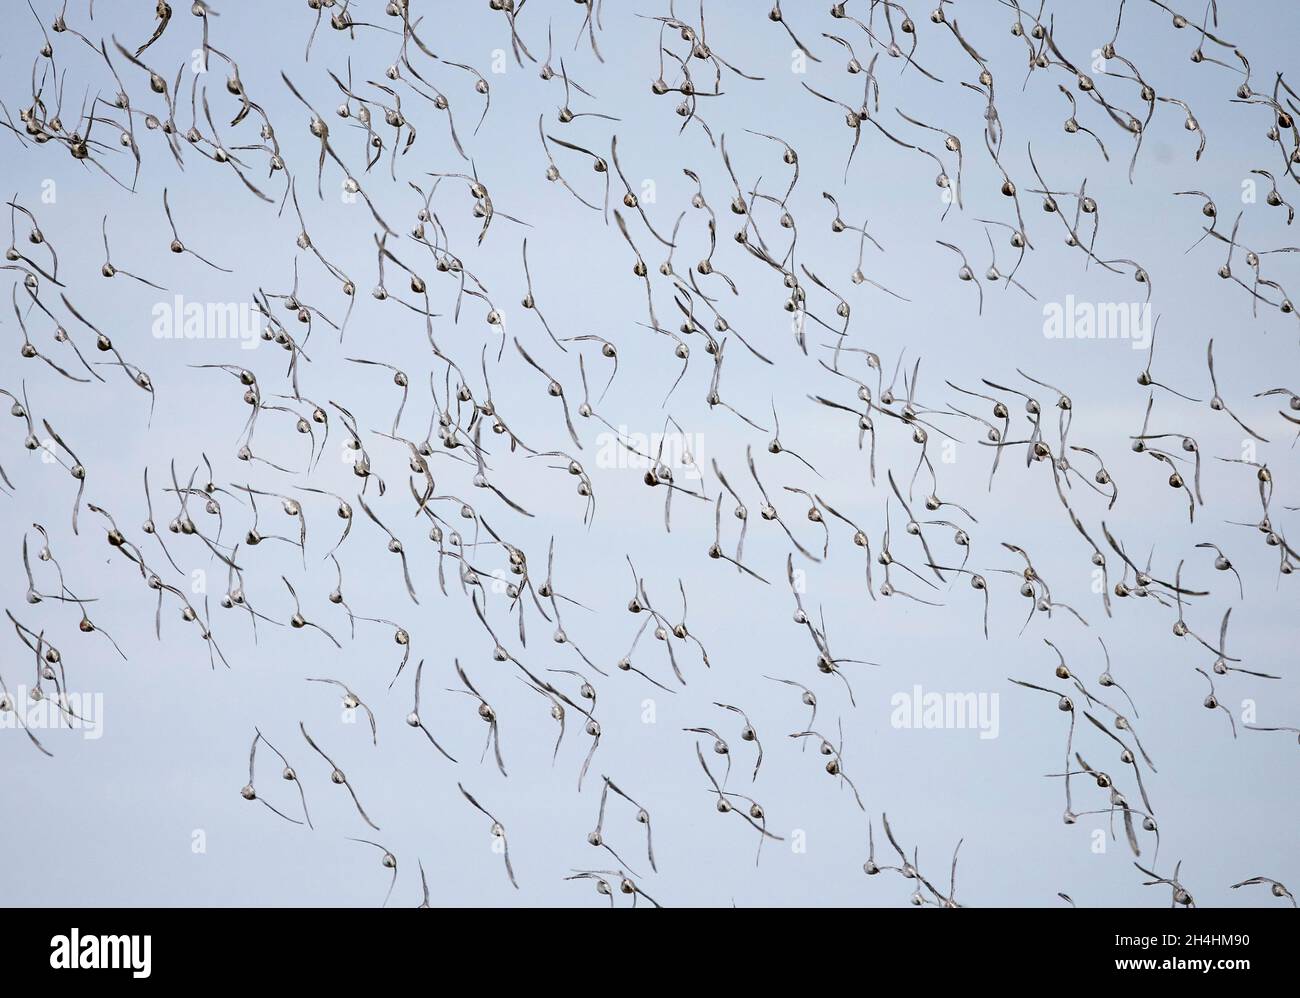 Knots Calidris canutus during a knot spectacular on the Wash at Snettisham Norfolk Stock Photo